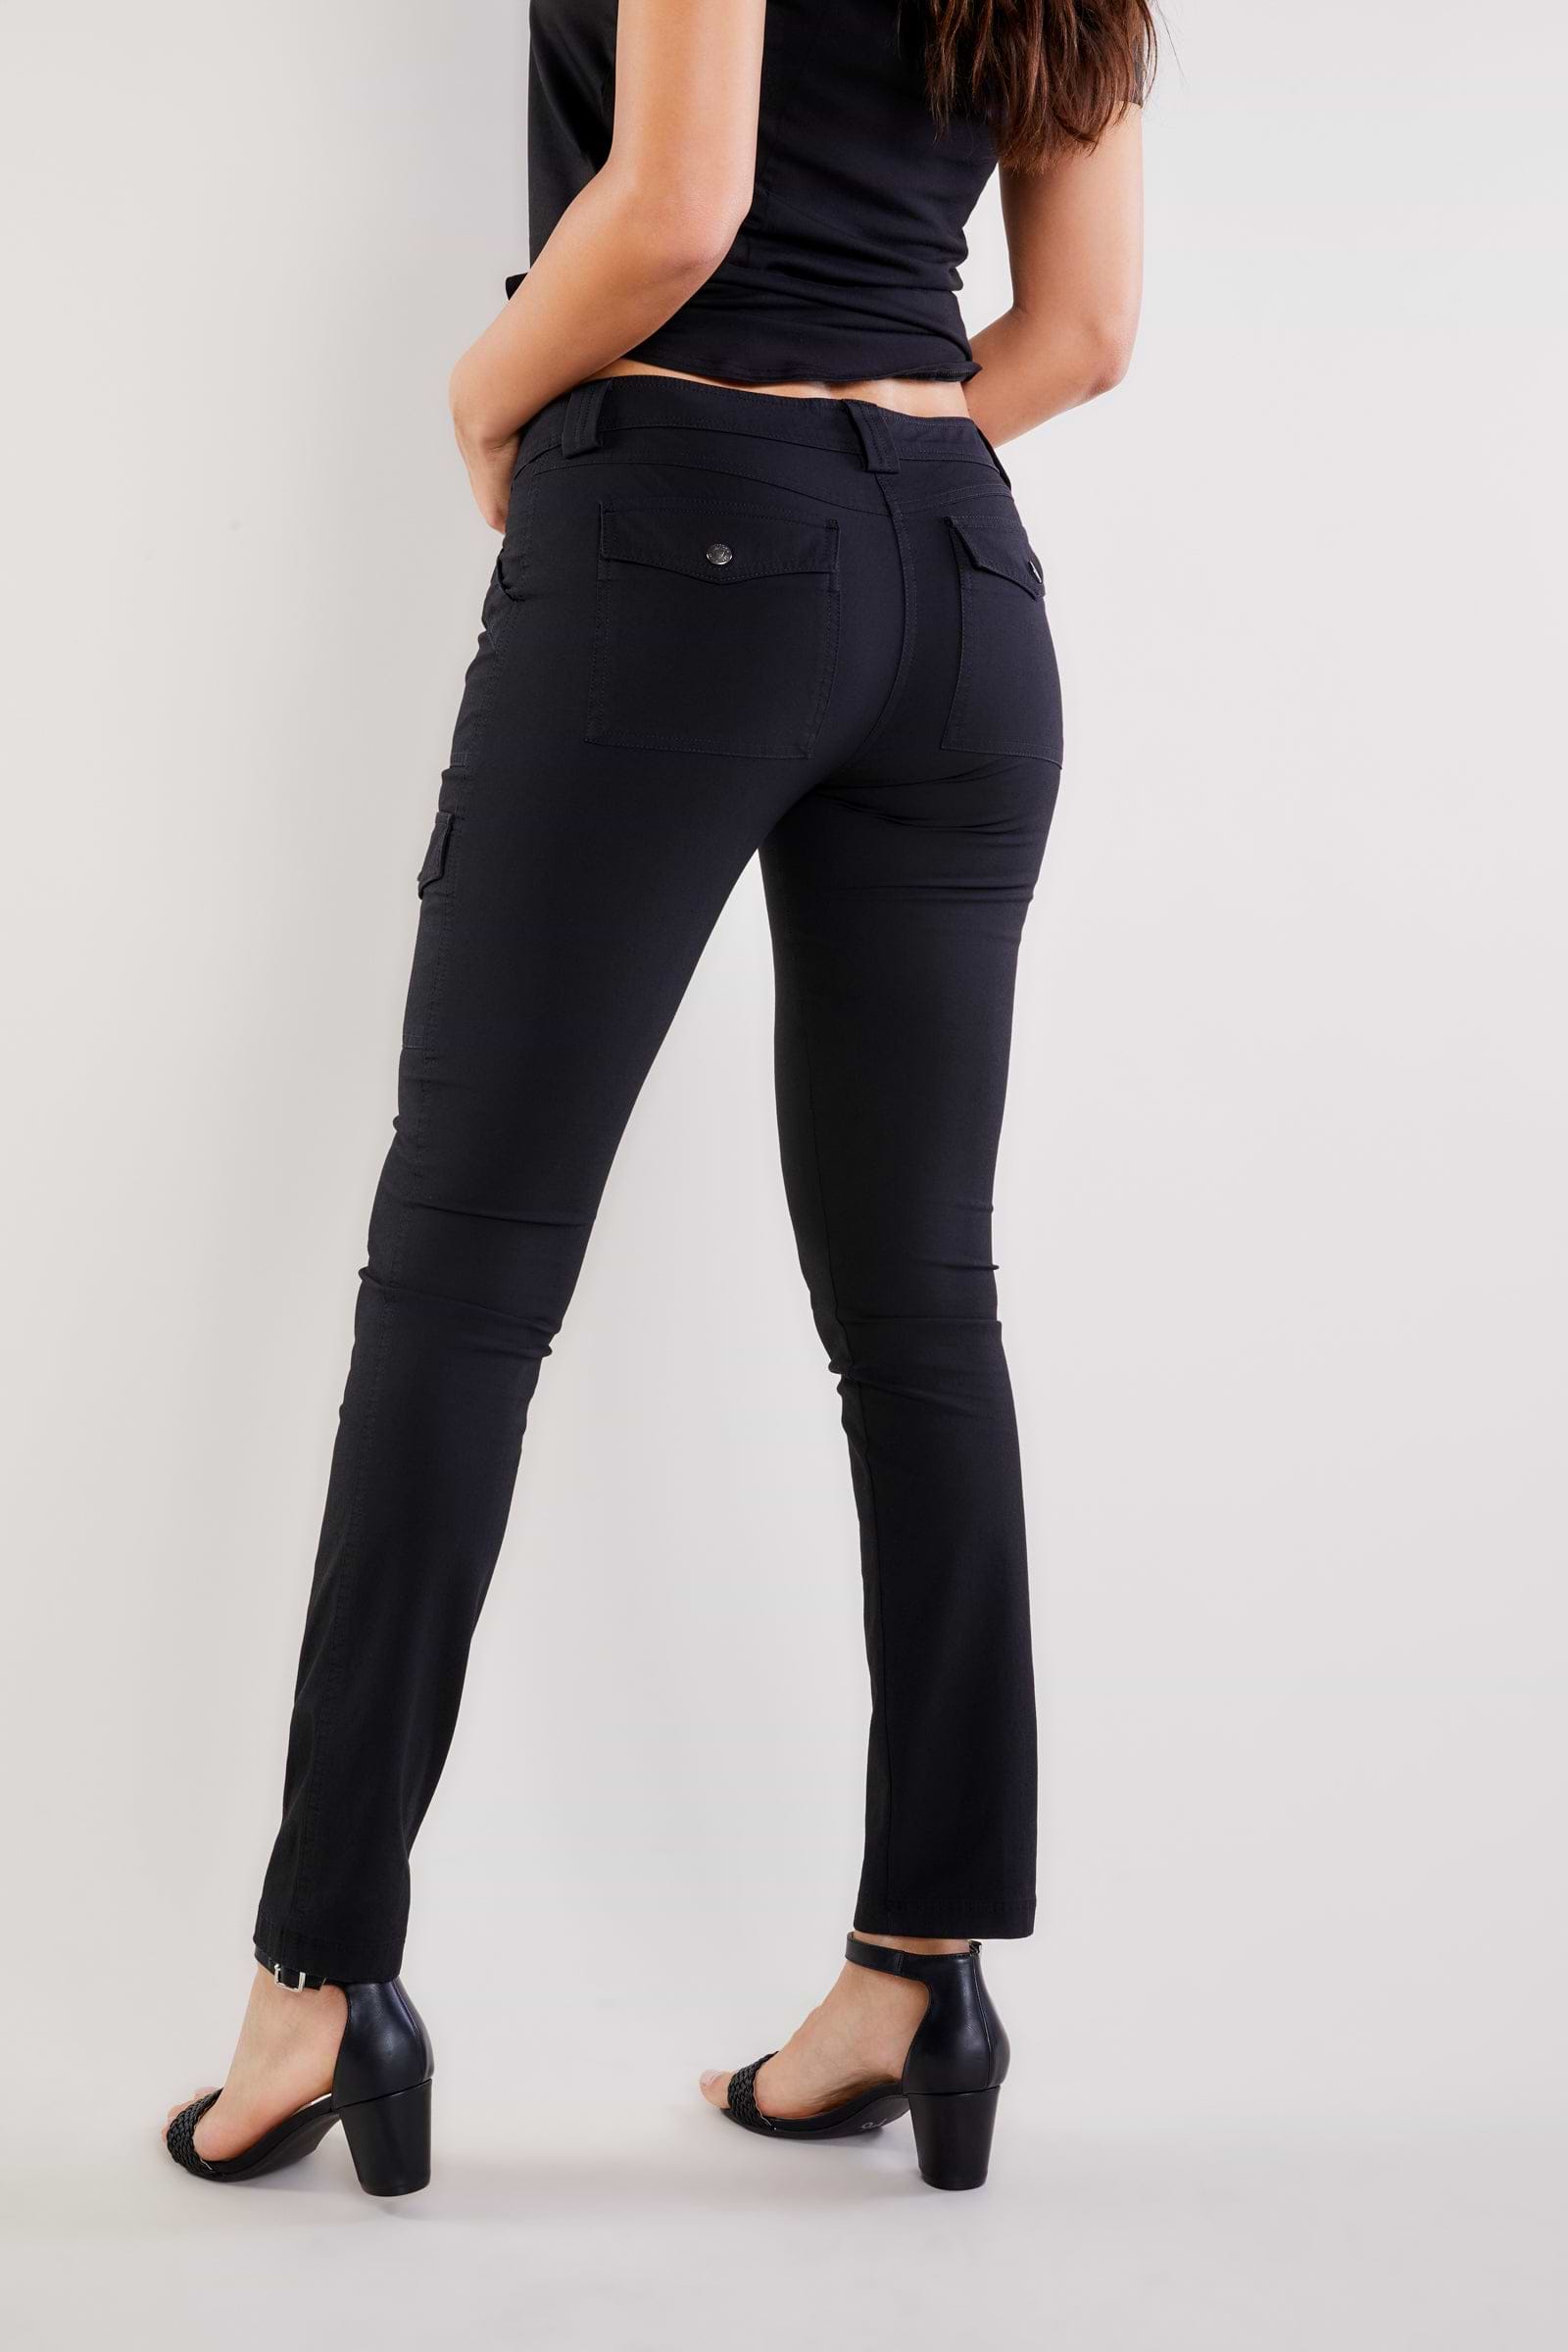 The Best Travel Cargo Pants. Back Profile of the Kate Skinny Cargo Pant in Black